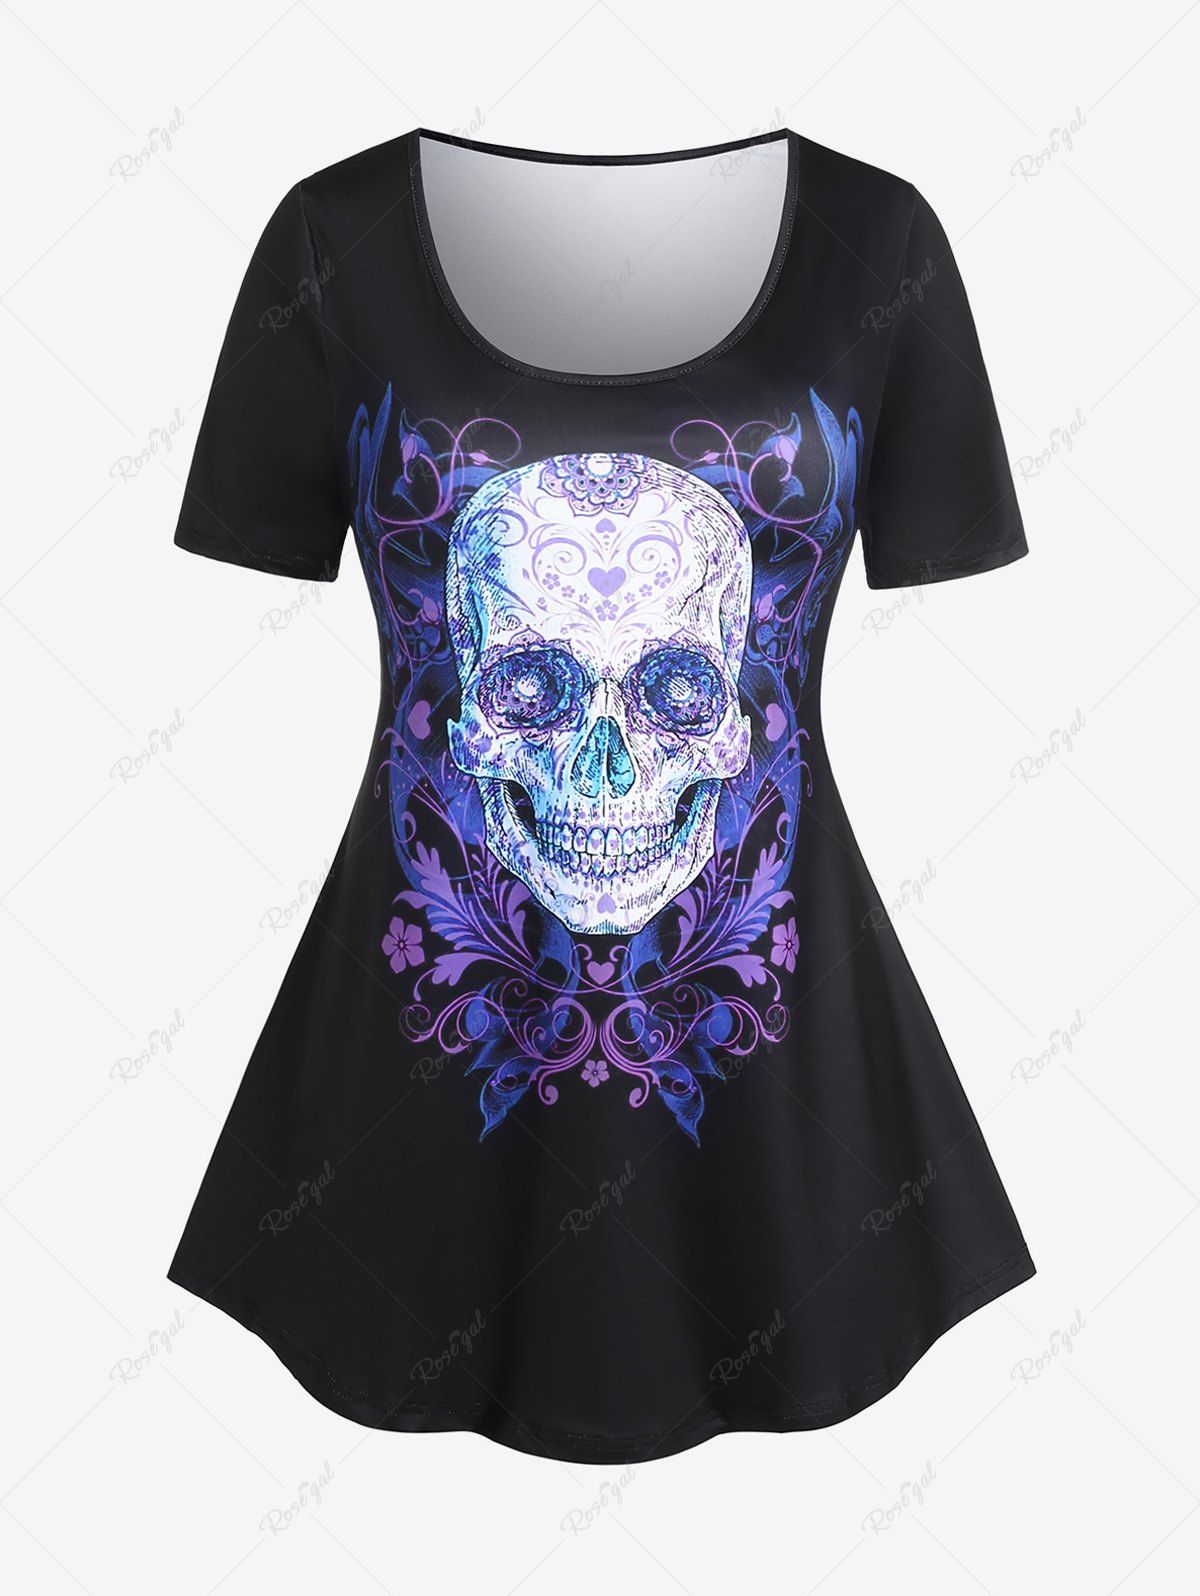 Shop Plus Size Skull Printed Short Sleeves Gothic Tee  